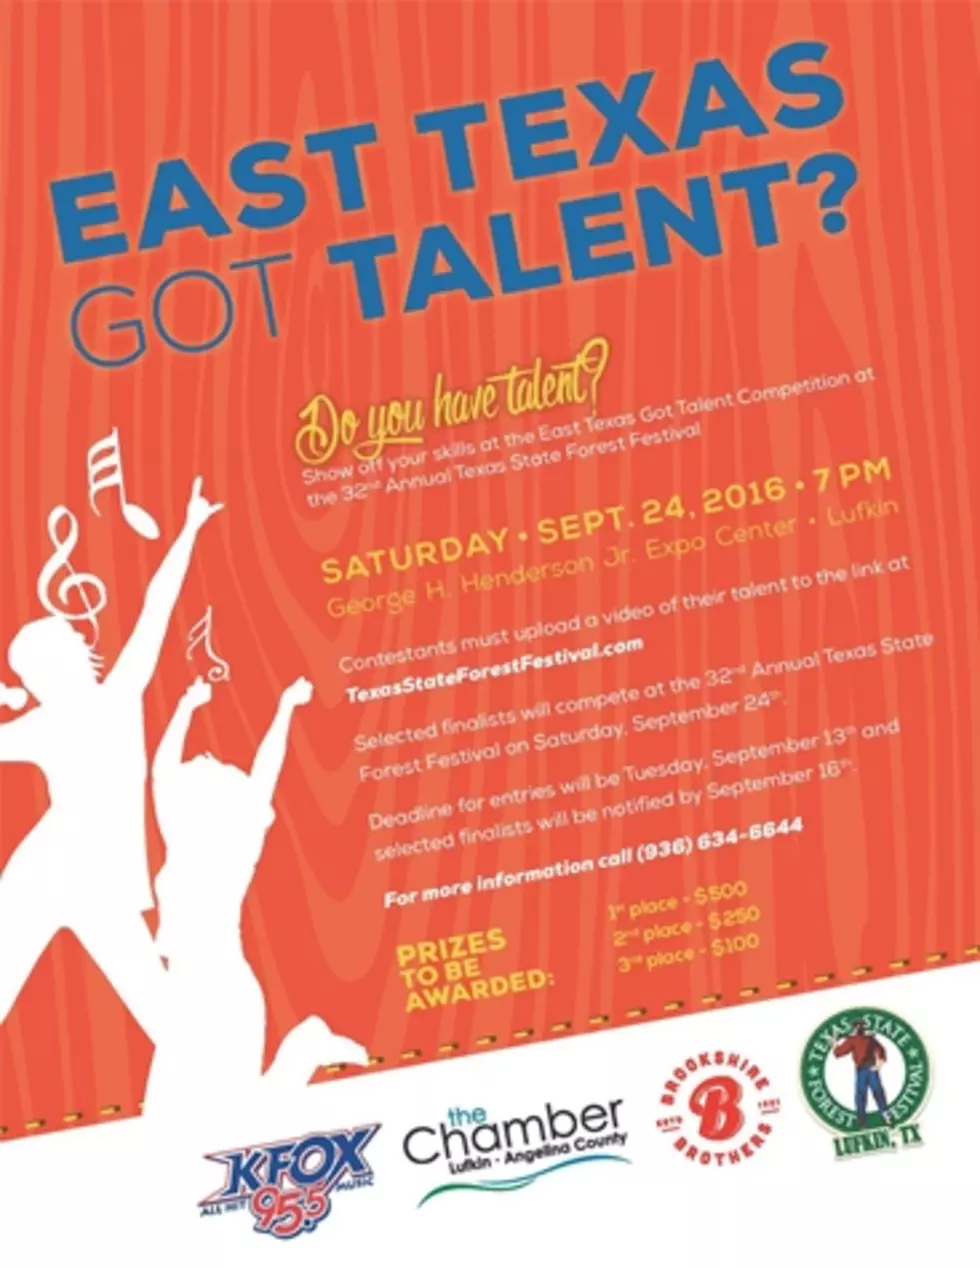 Show Us What You Got! &#8211; East Texas Got Talent Is Back For 2016